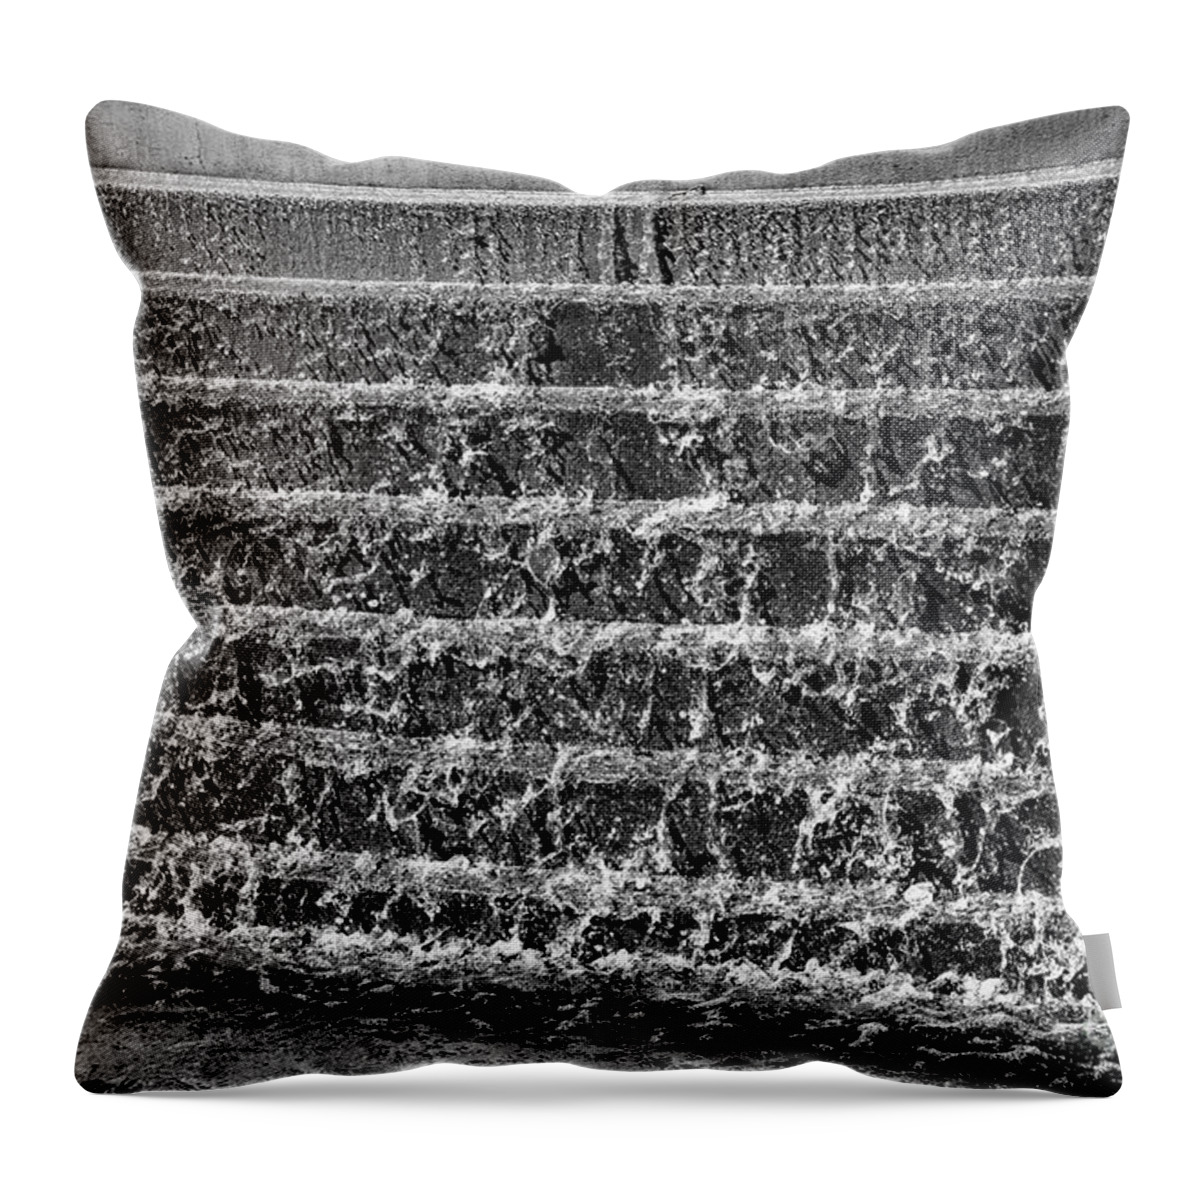 Scottsdale Throw Pillow featuring the photograph Another Scottsdale Fountain BW by Elisabeth Lucas